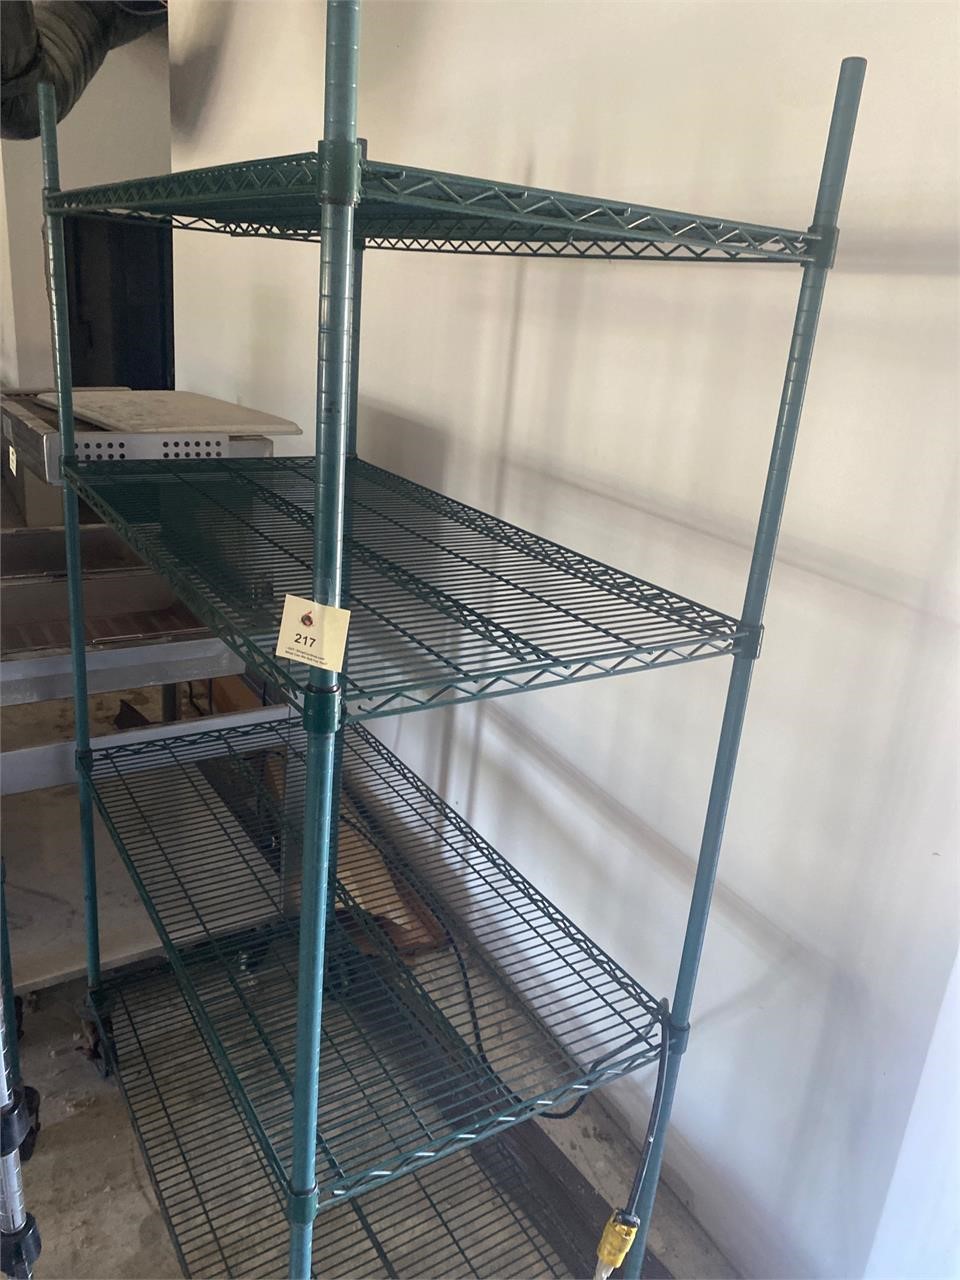 4’ x 2’ green commercial rolling shelf system